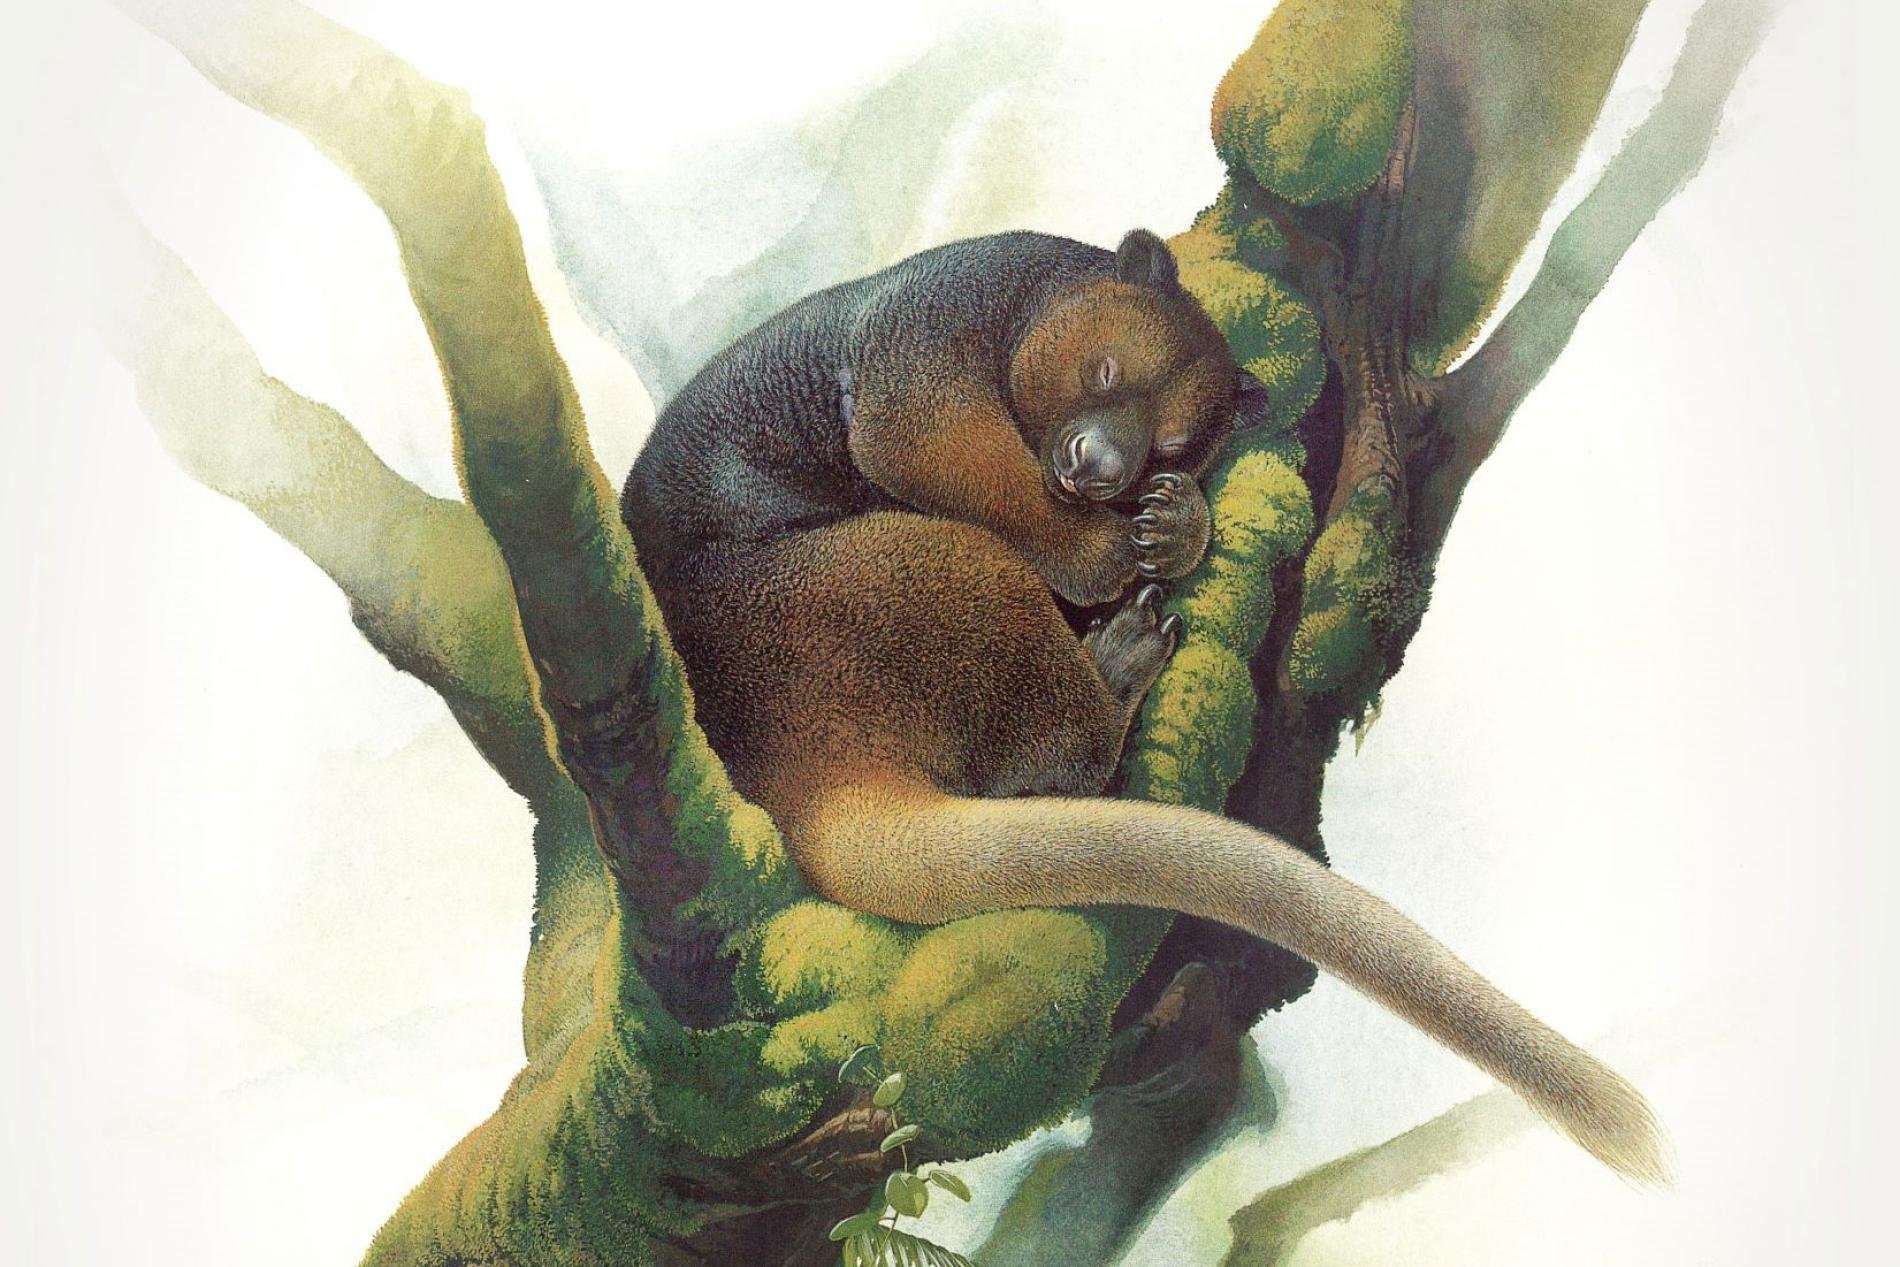 image for Rare Tree Kangaroo Reappears After Vanishing for 90 Years